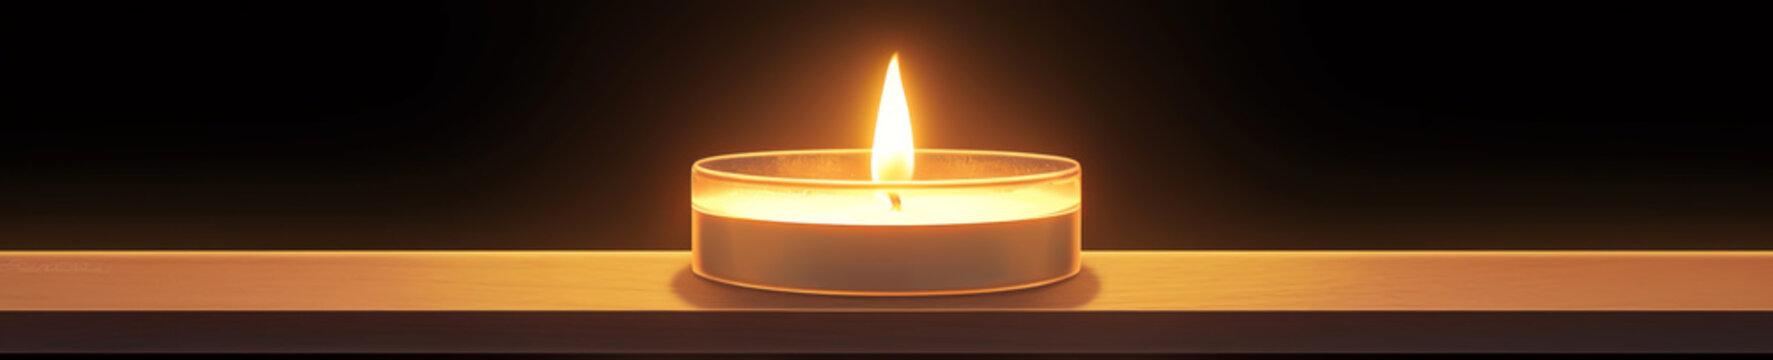 A candle that burns with scents of places you miss, nostalgia in a flickering flame